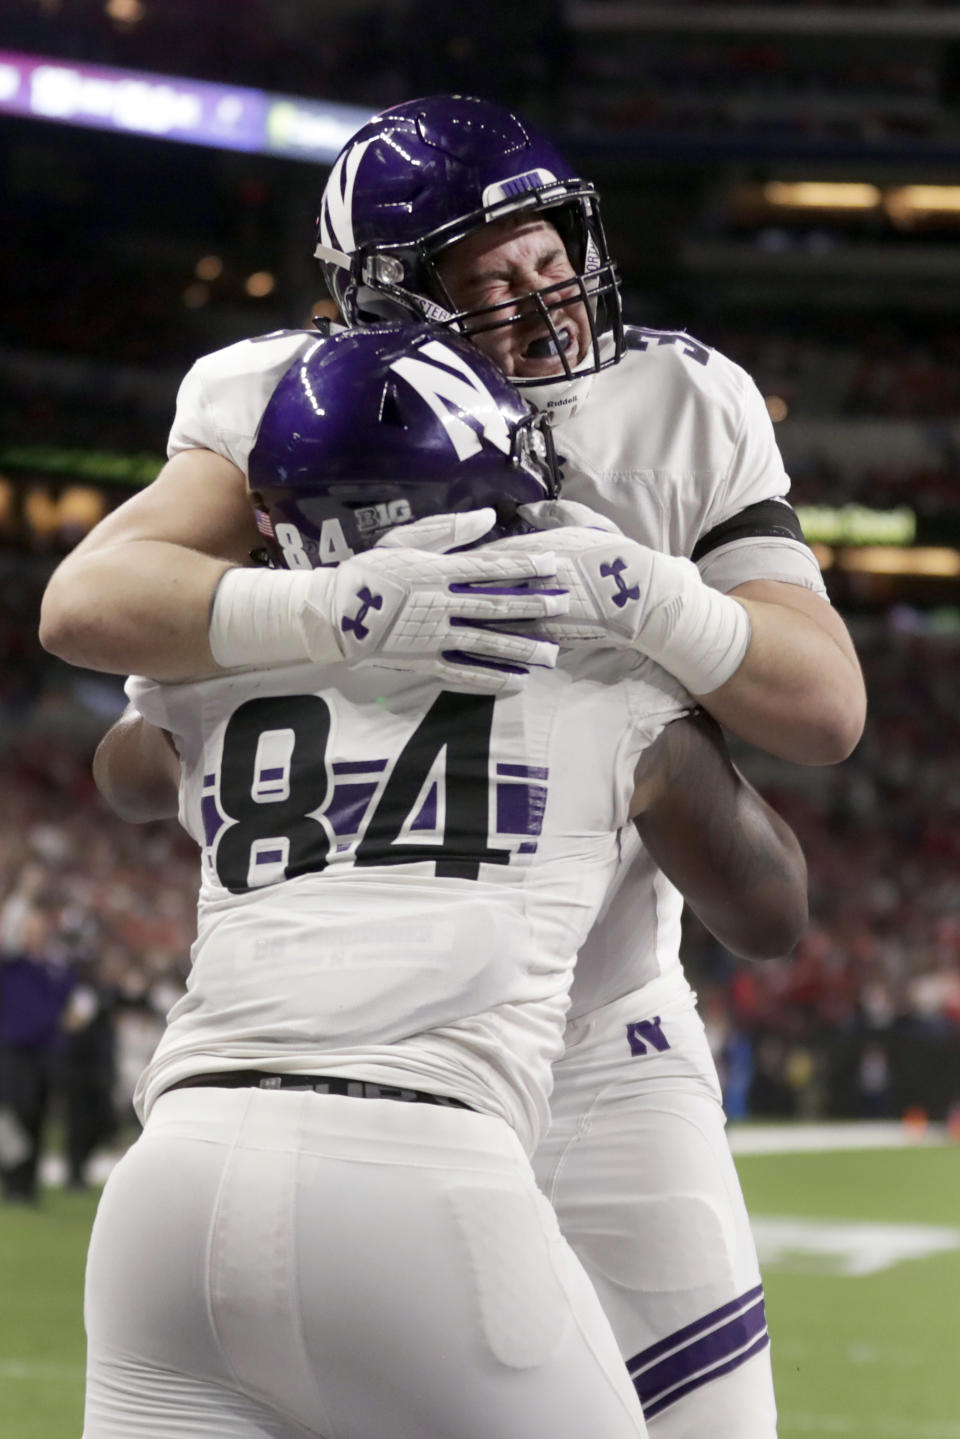 Northwestern wide receiver Cameron Green (84) celebrates a touchdown with teammate Trey Klock during the second half of the Big Ten championship NCAA college football game against Ohio State, Saturday, Dec. 1, 2018, in Indianapolis. (AP Photo/Michael Conroy)